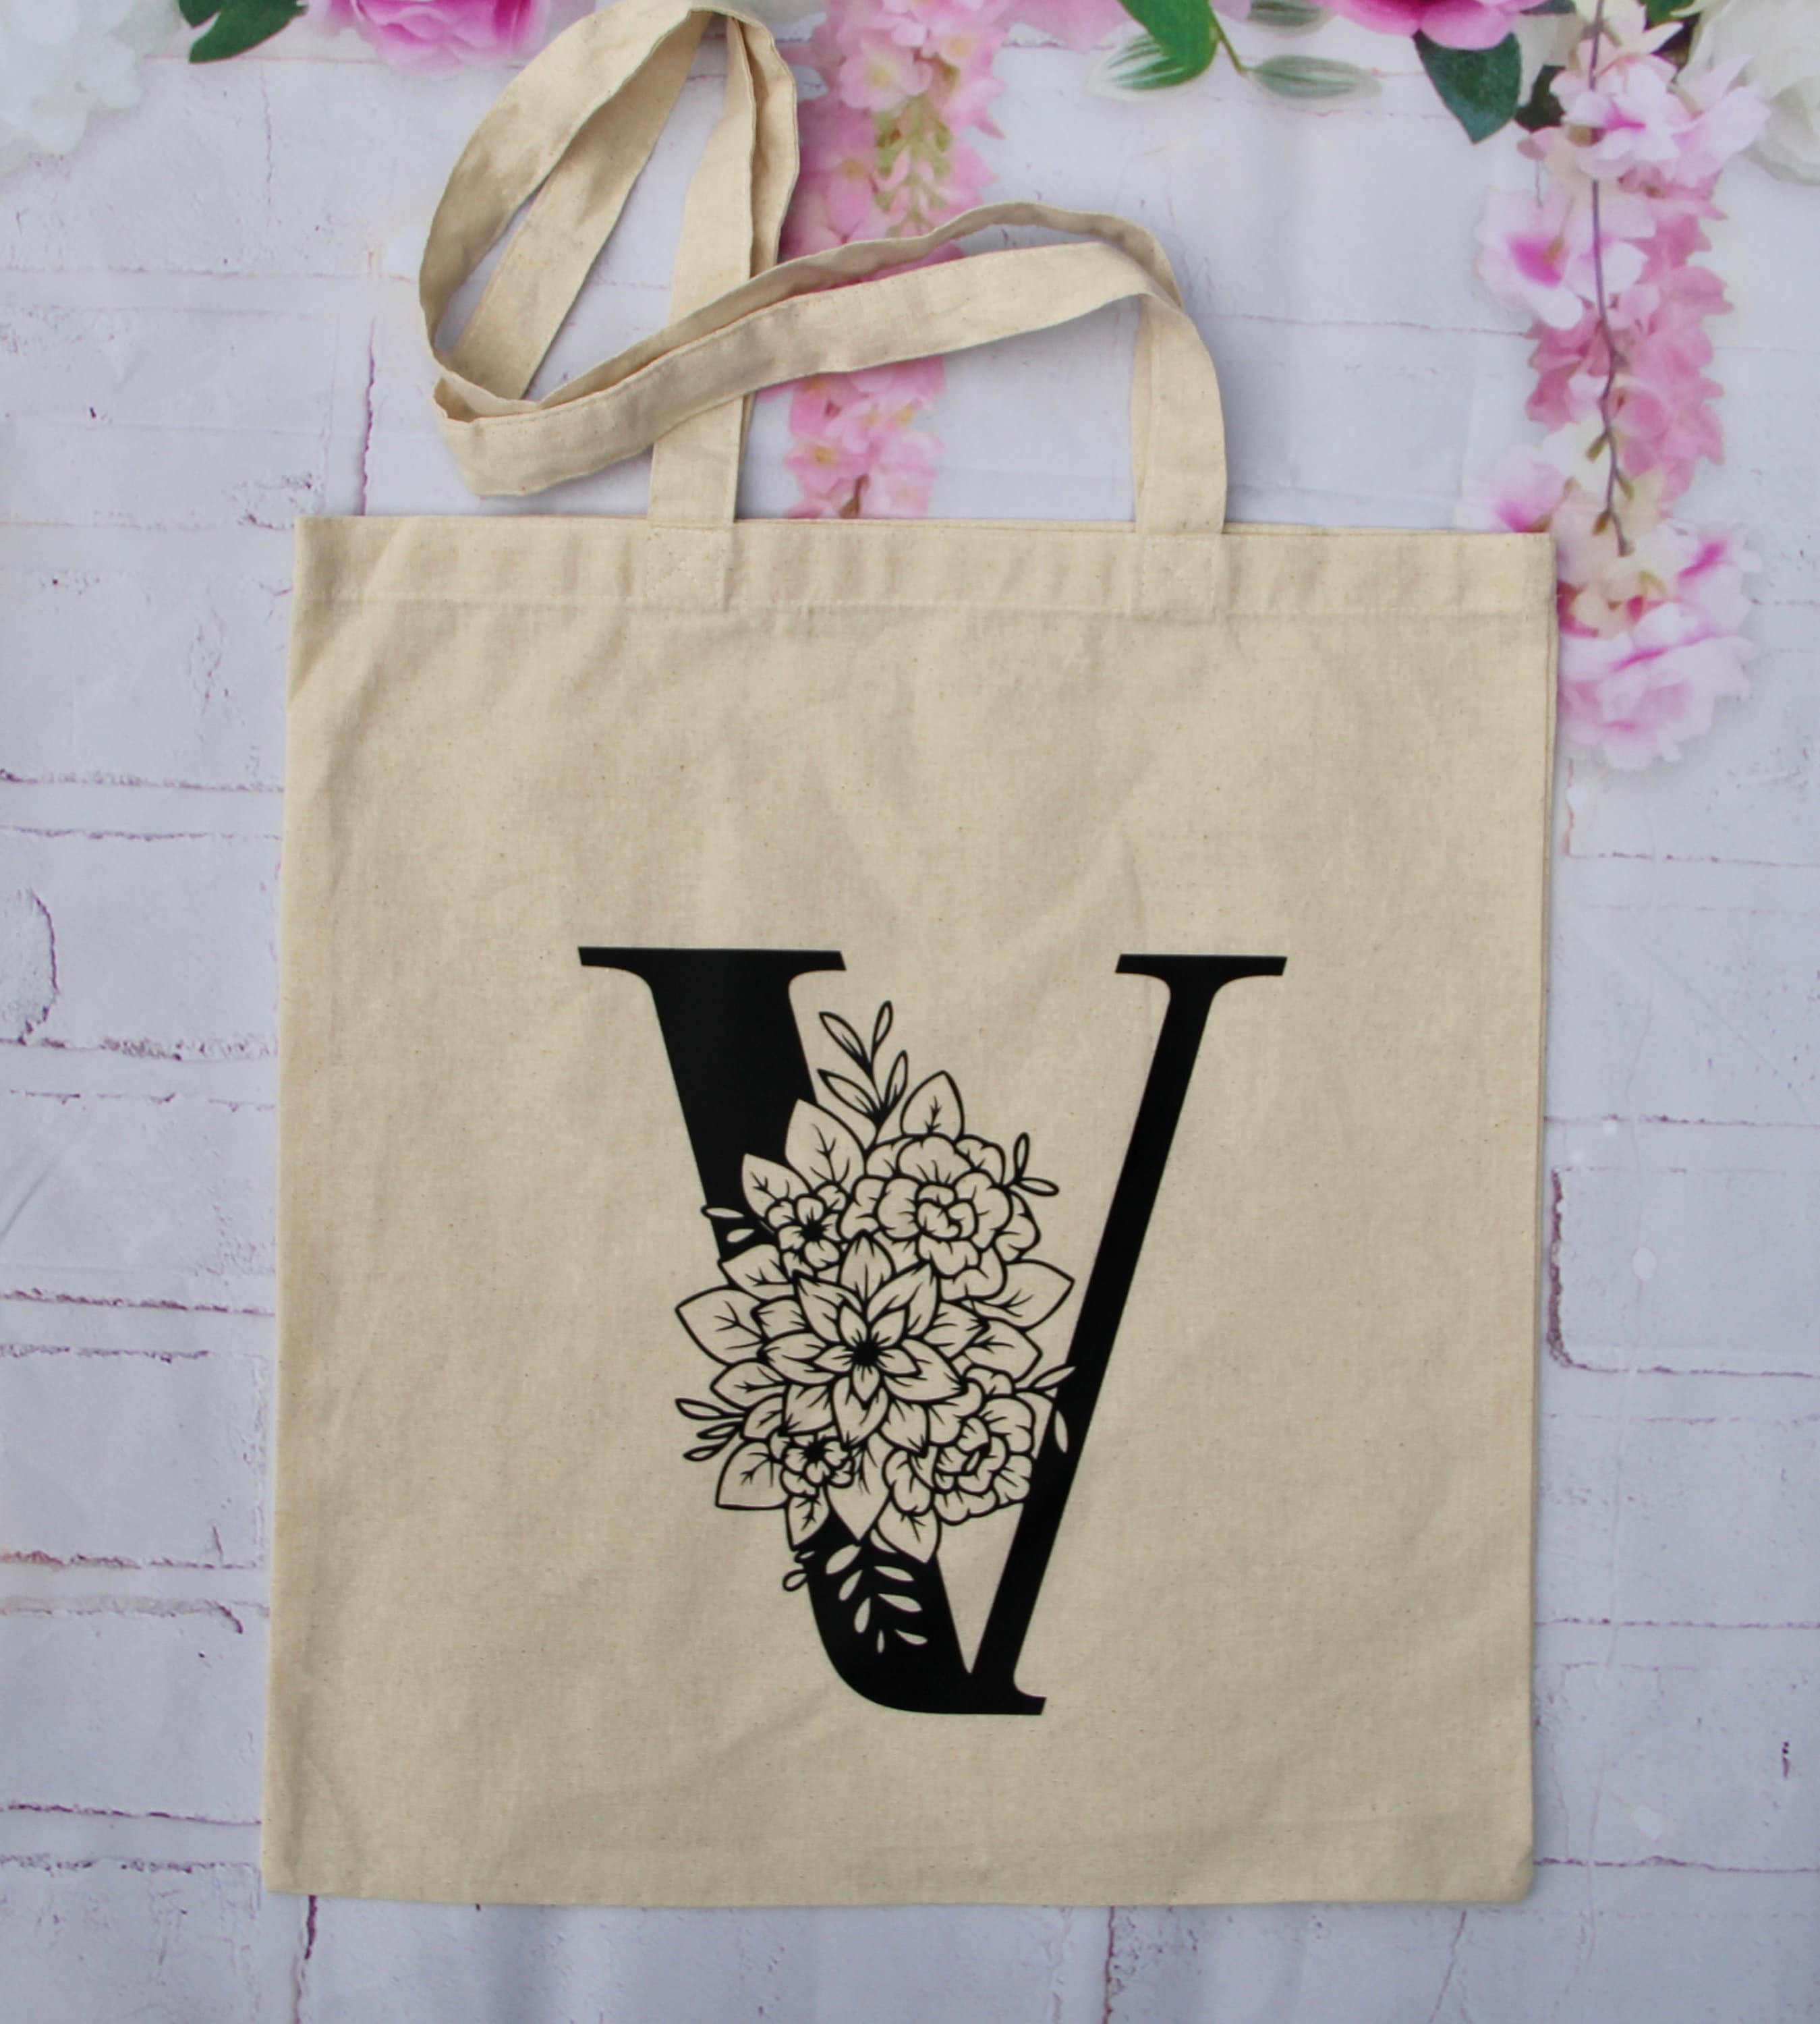 QLOVEA Initial Canvas Tote Bag Work Tote Bags Gifts For Women